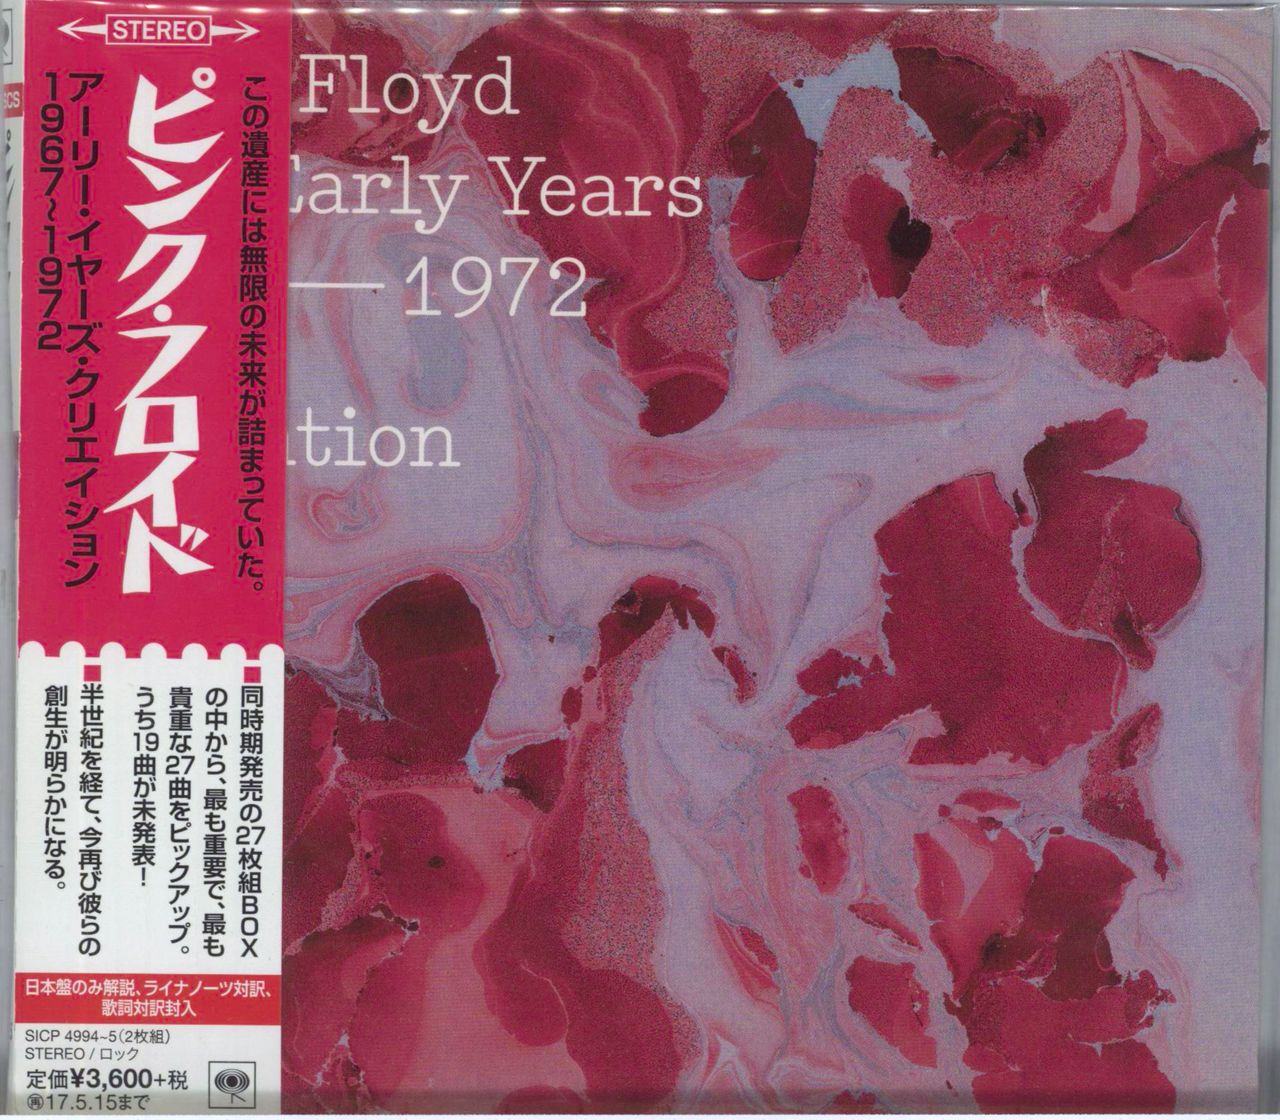 Pink Floyd Cre/ation - The Early Years 1967 - 1972 Japanese Promo